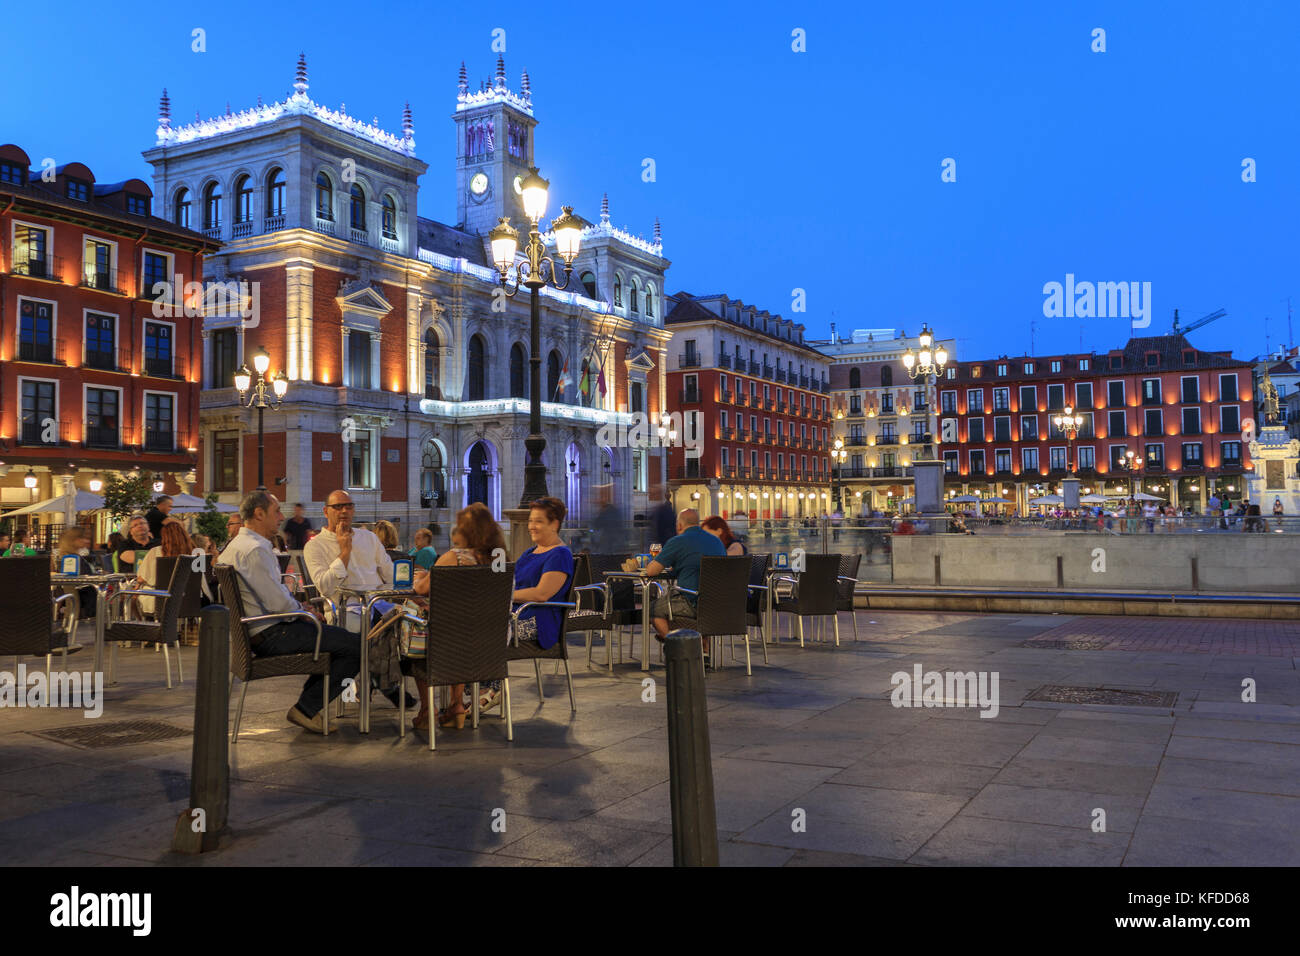 Groups sitting at outside tables enjoying the evening on the Plaza Mayor Valladolid Spain. Floodlit Townhall in the background Stock Photo